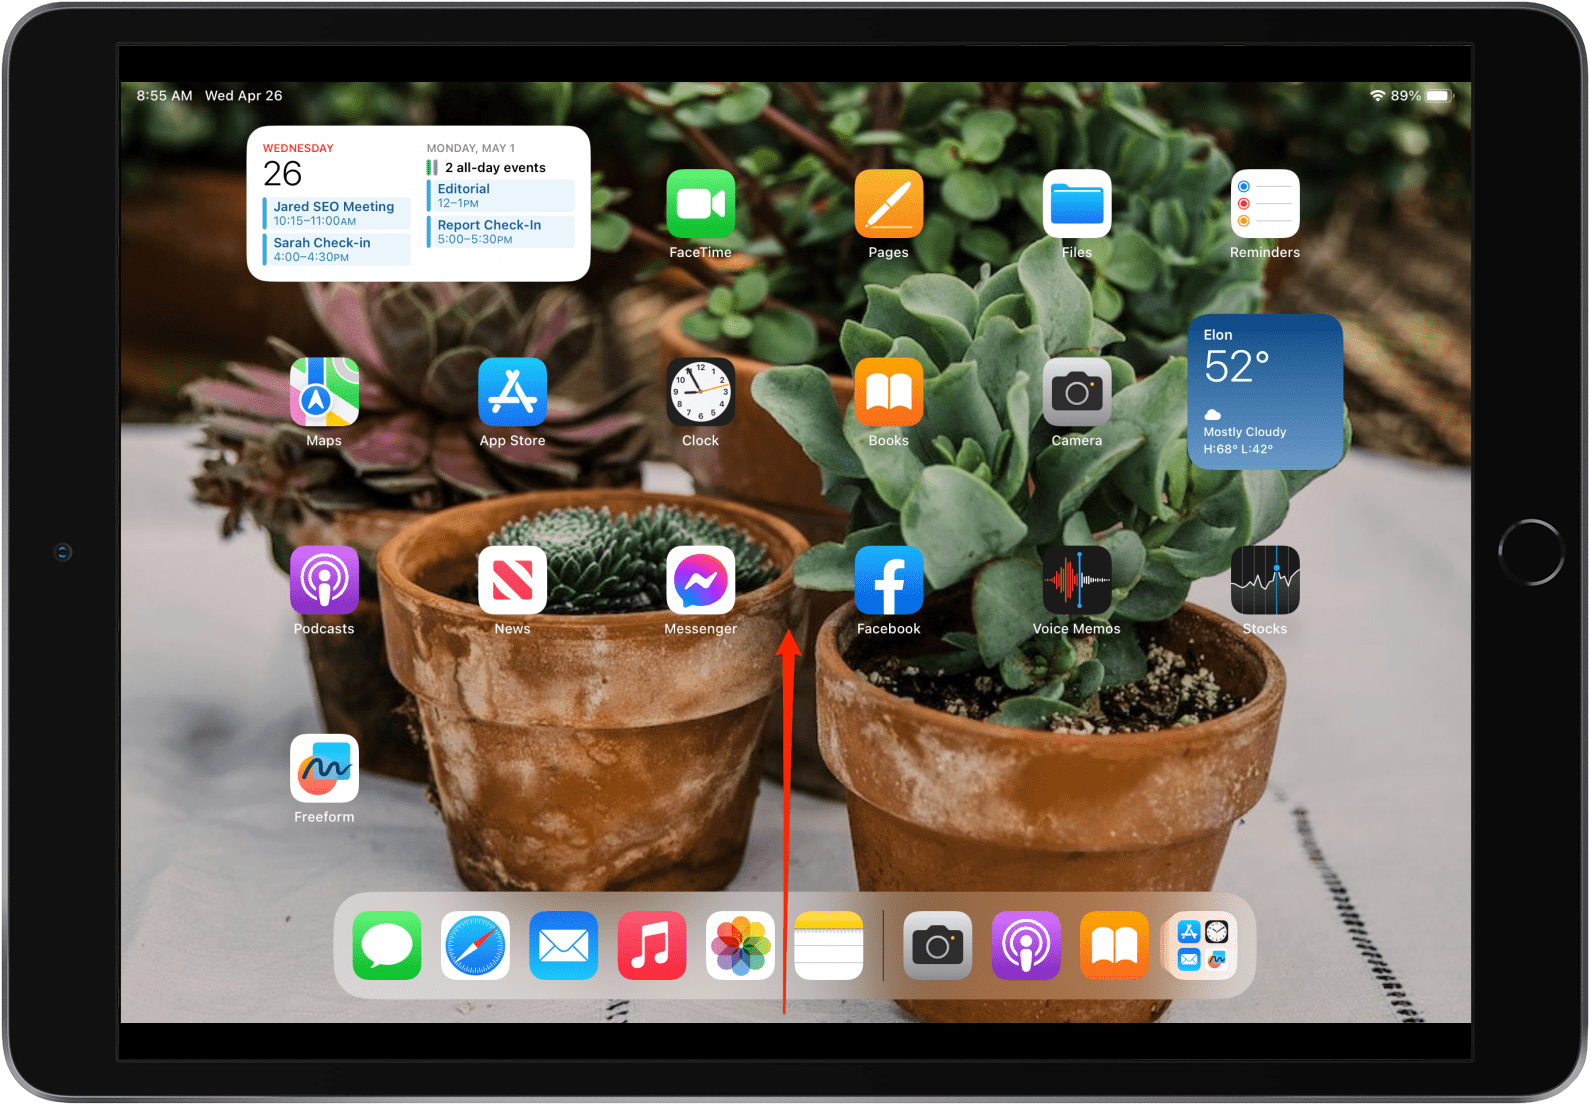 Swipe up from the bottom of your screen to open App Switcher.